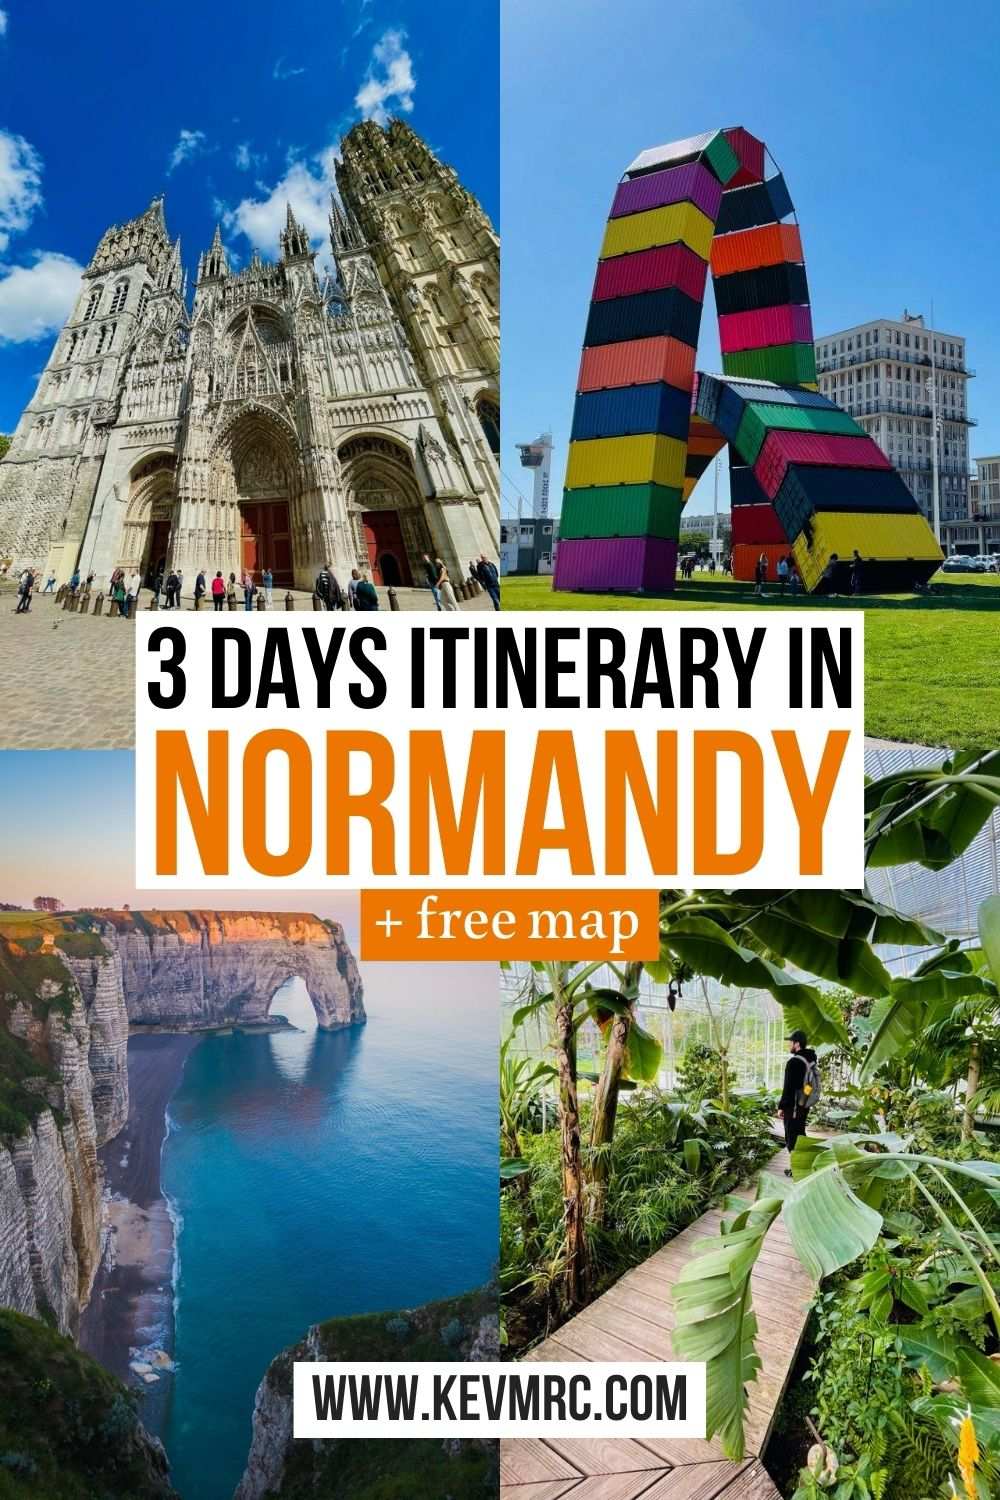 Plan your 3 day itinerary to Normandy France thanks to this guide with a free map. You will find everything to see and do in Normandy, with suggestions to extend your trip. normandy france travel | things to do in normandy france | normandy france itinerary | road trip to Normandy